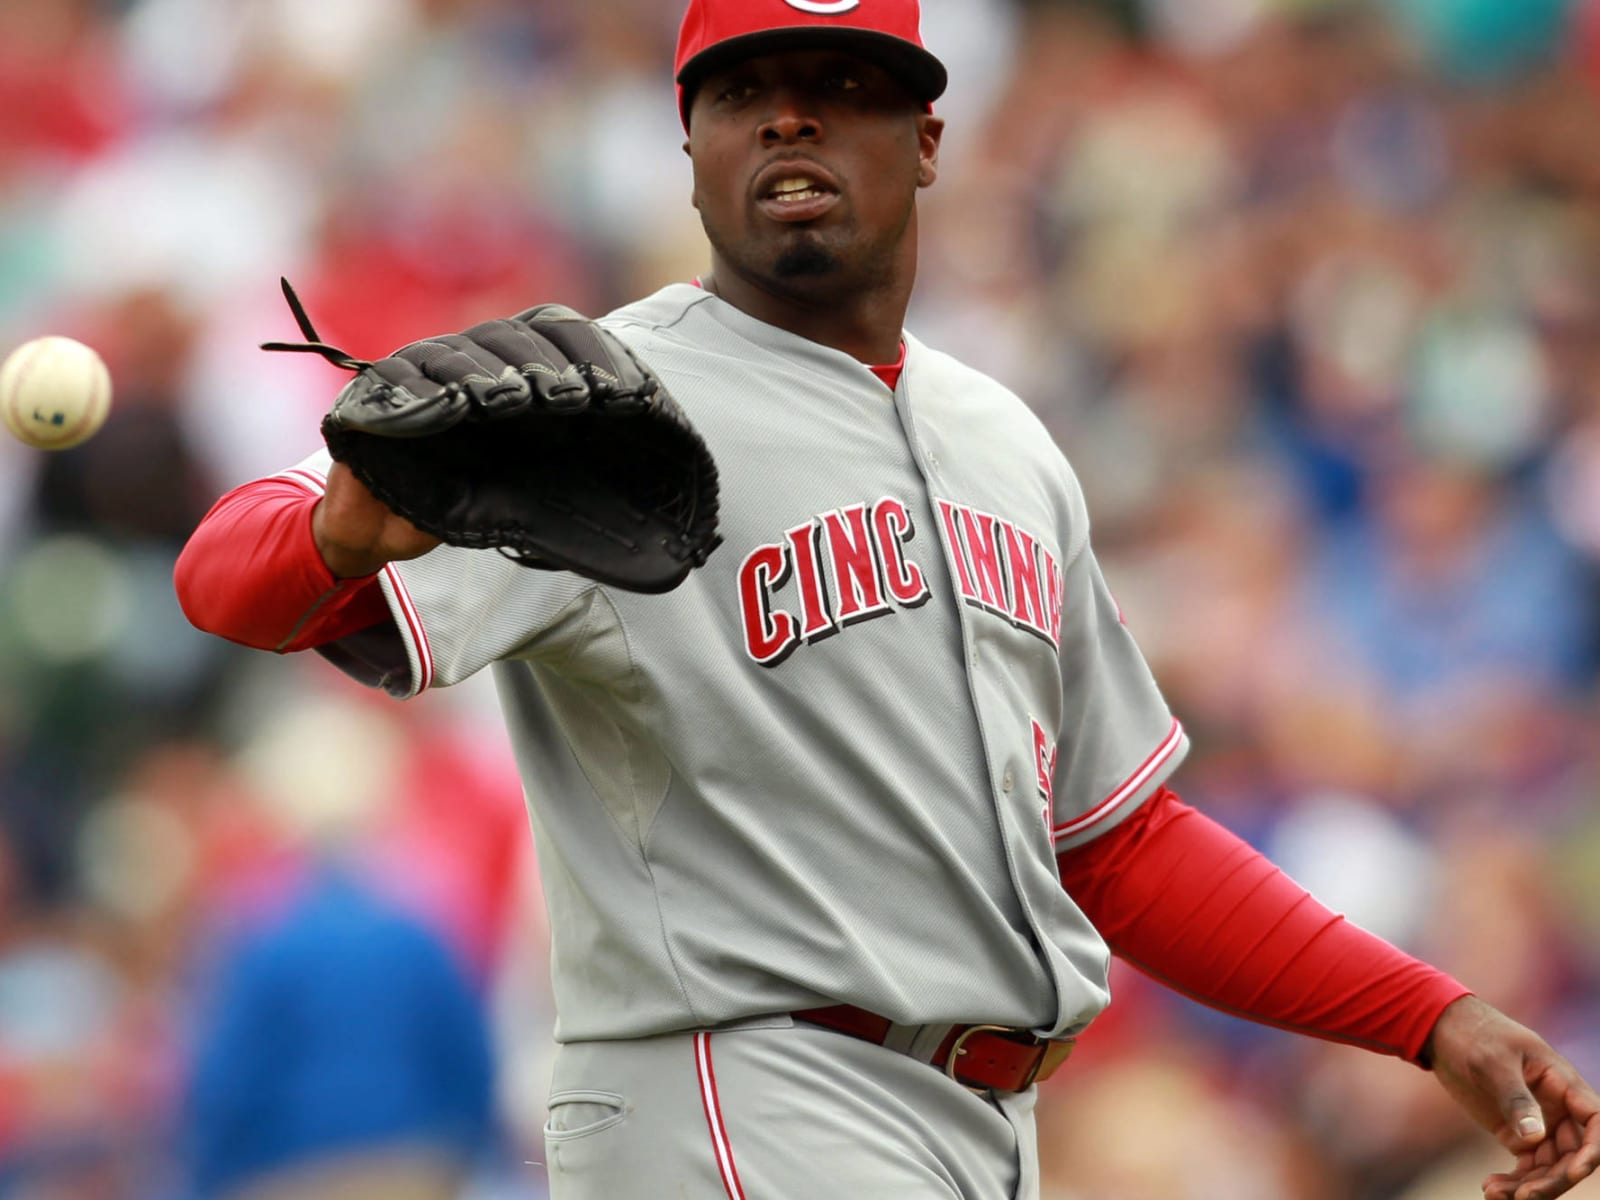 A passion for baseball still drives Dontrelle Willis